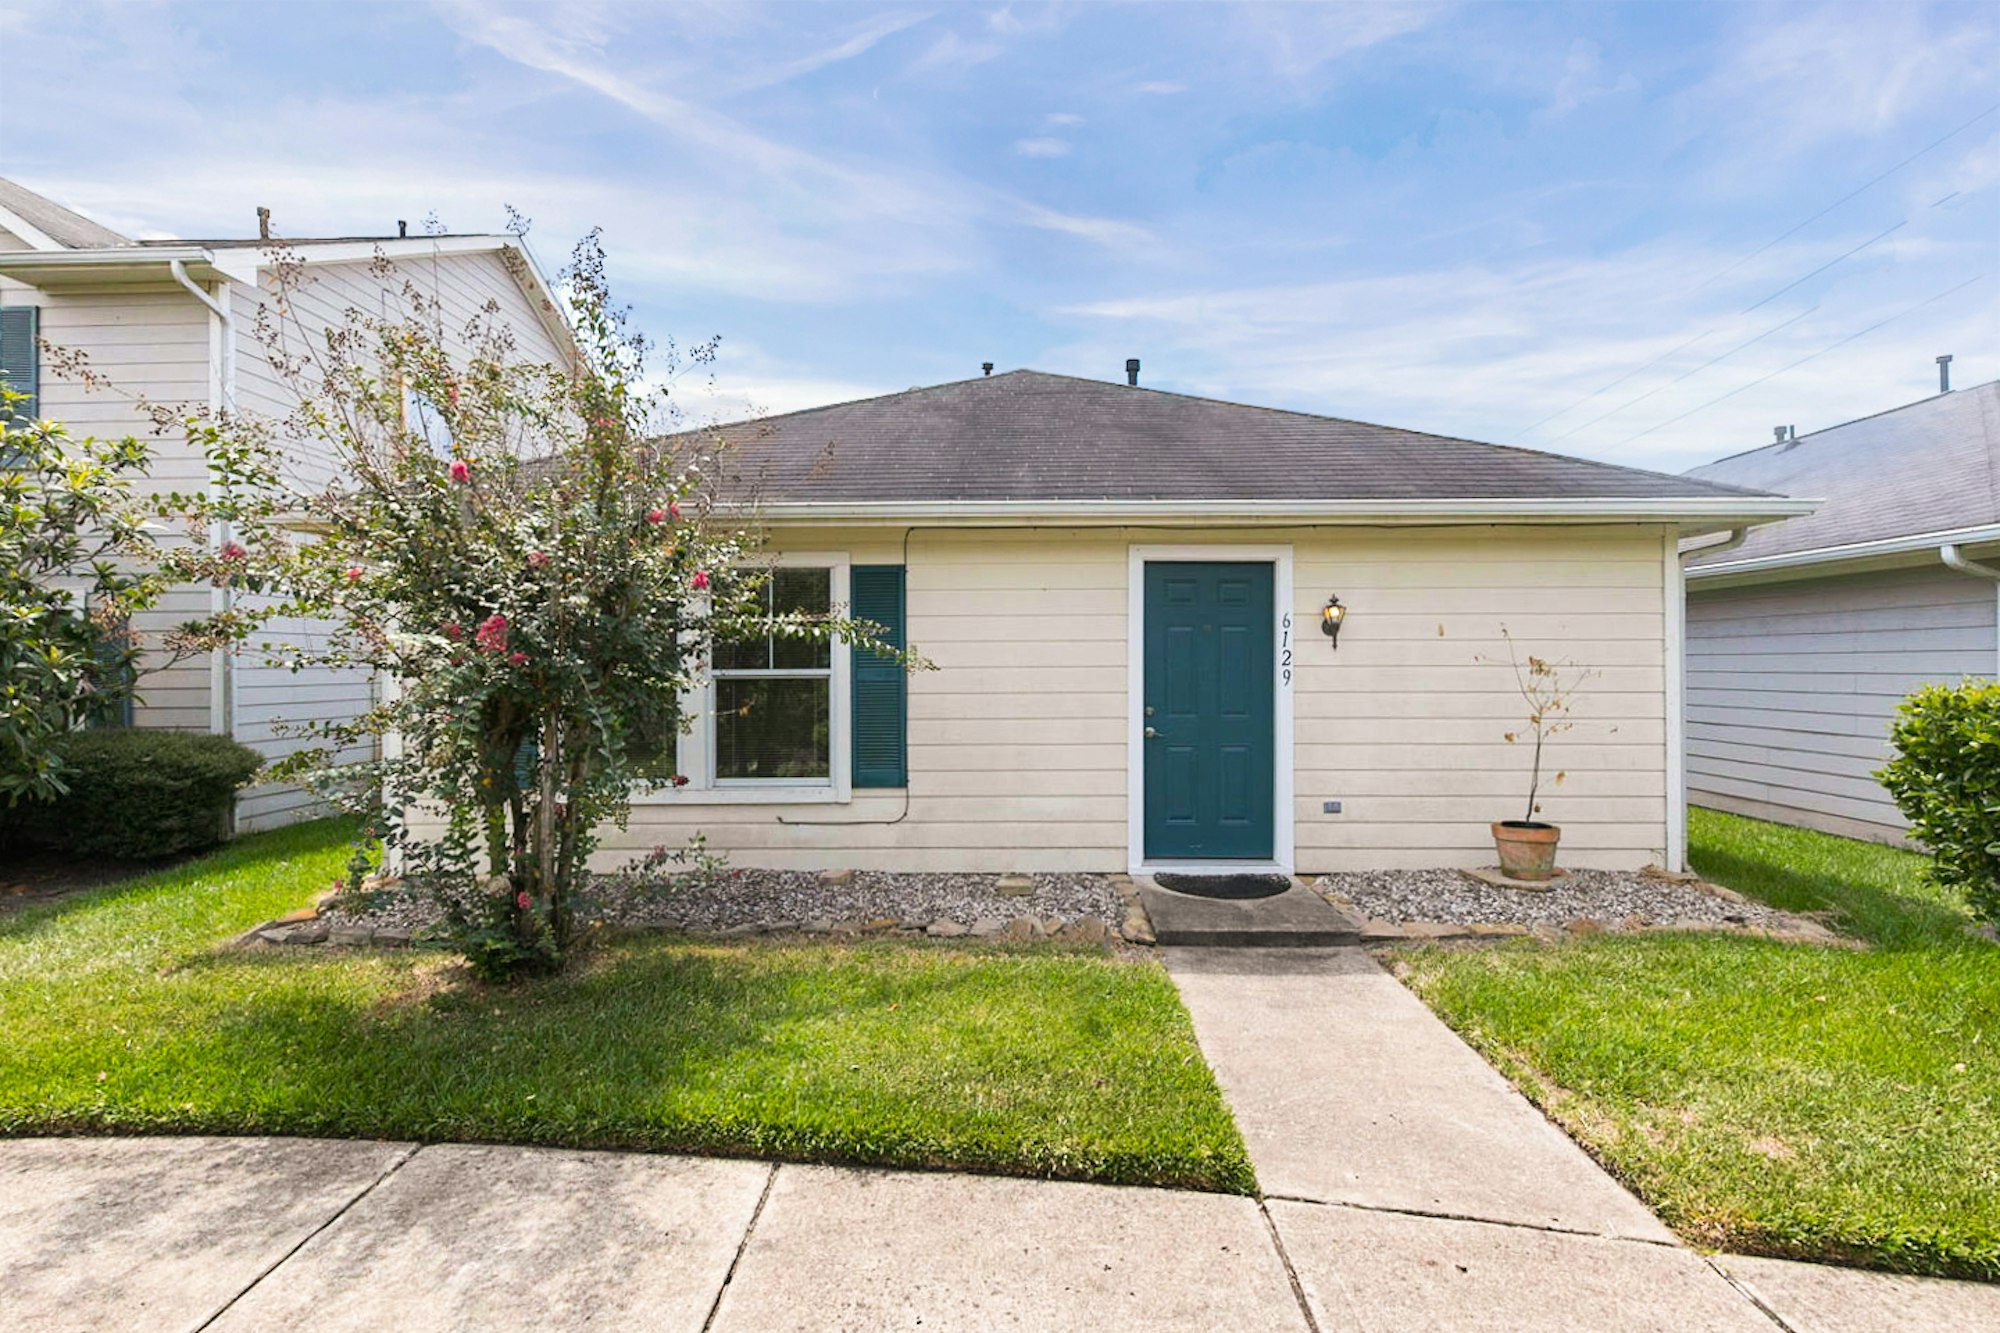 Photo 1 of 16 - 6129 Settlers Square Ln, Katy, TX 77449